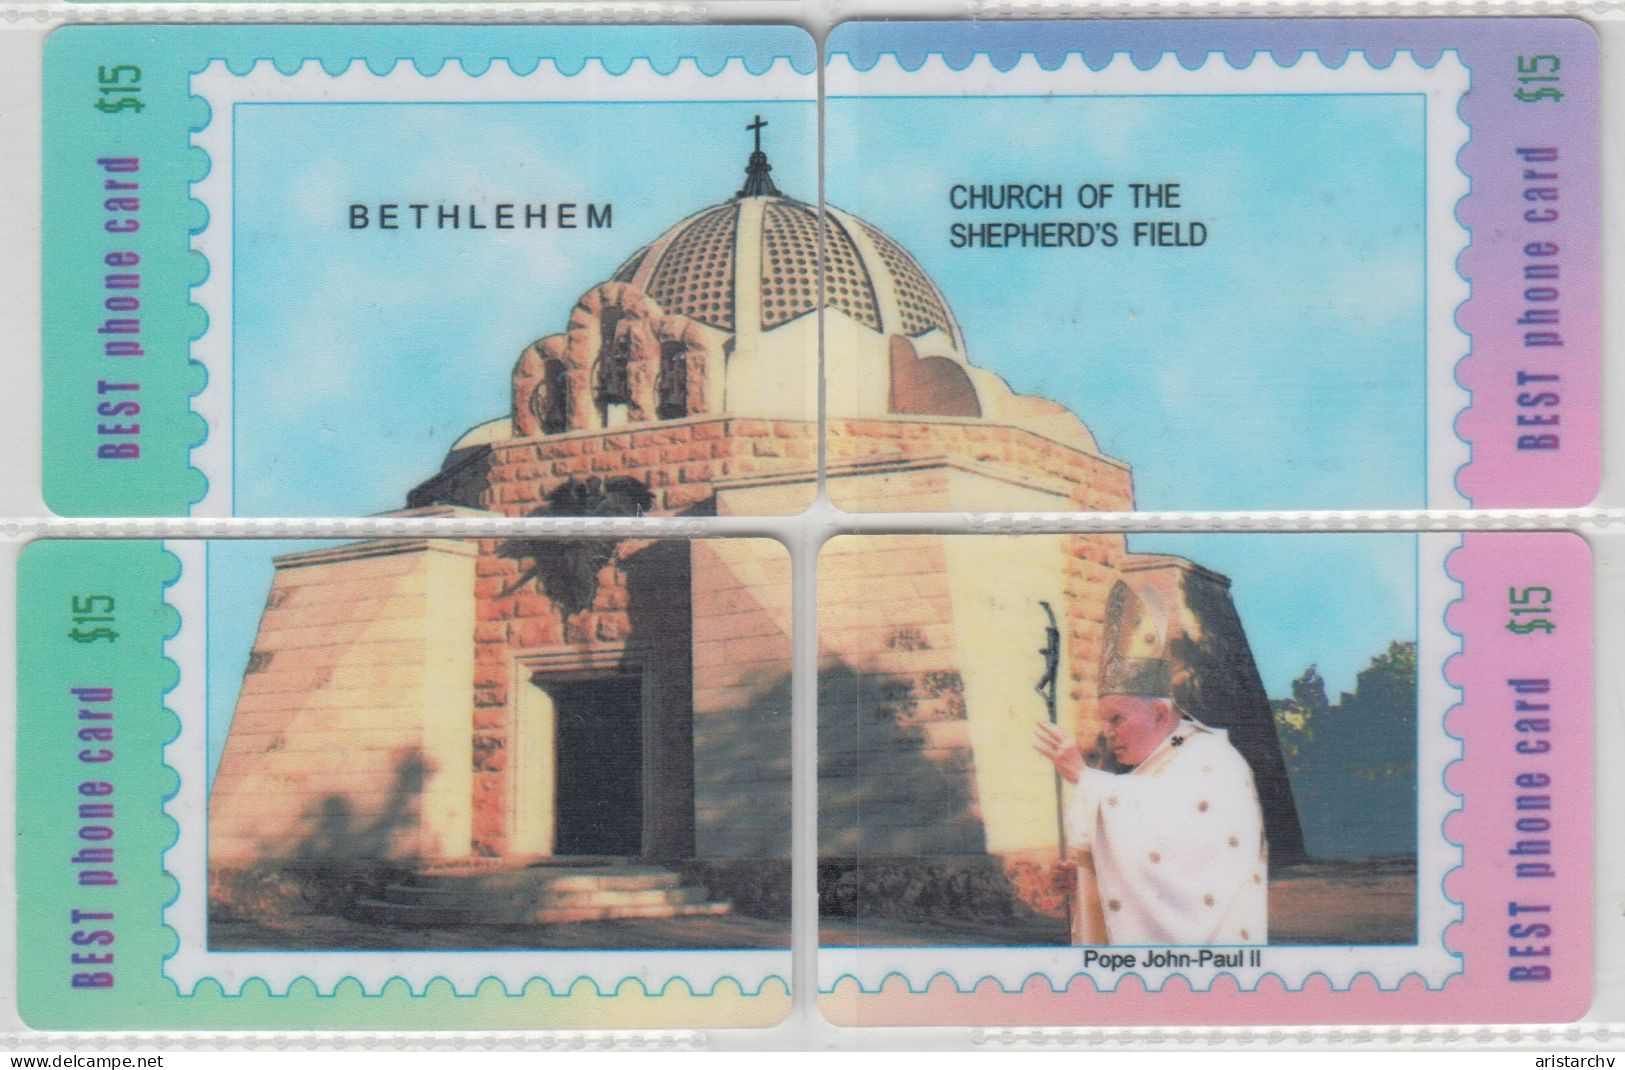 ISRAEL BETHLEHEM CHURCH OF THE SHEPHERD'S FIELD INTERIOR OF THE BASILICA OF THE NATIVITY POPE JOHN PAUL II 2 PUZZLES - Puzzle